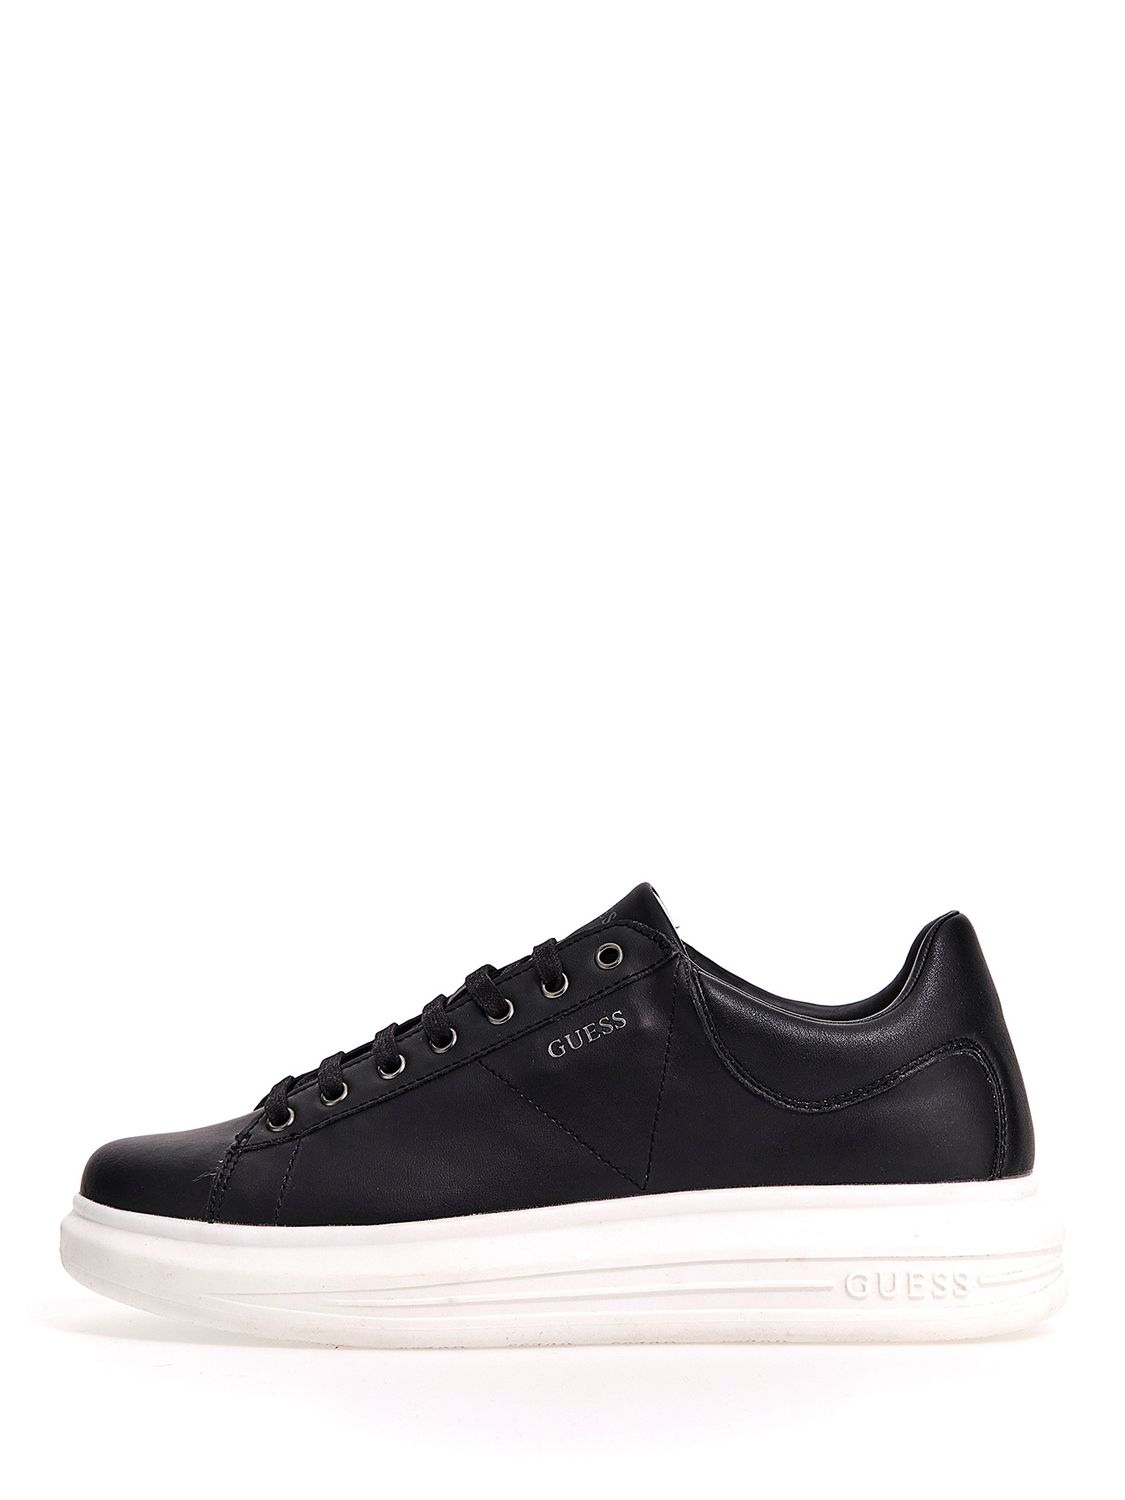 Buy GUESS Vibo Mixed Leather Trainers, Black Online at johnlewis.com